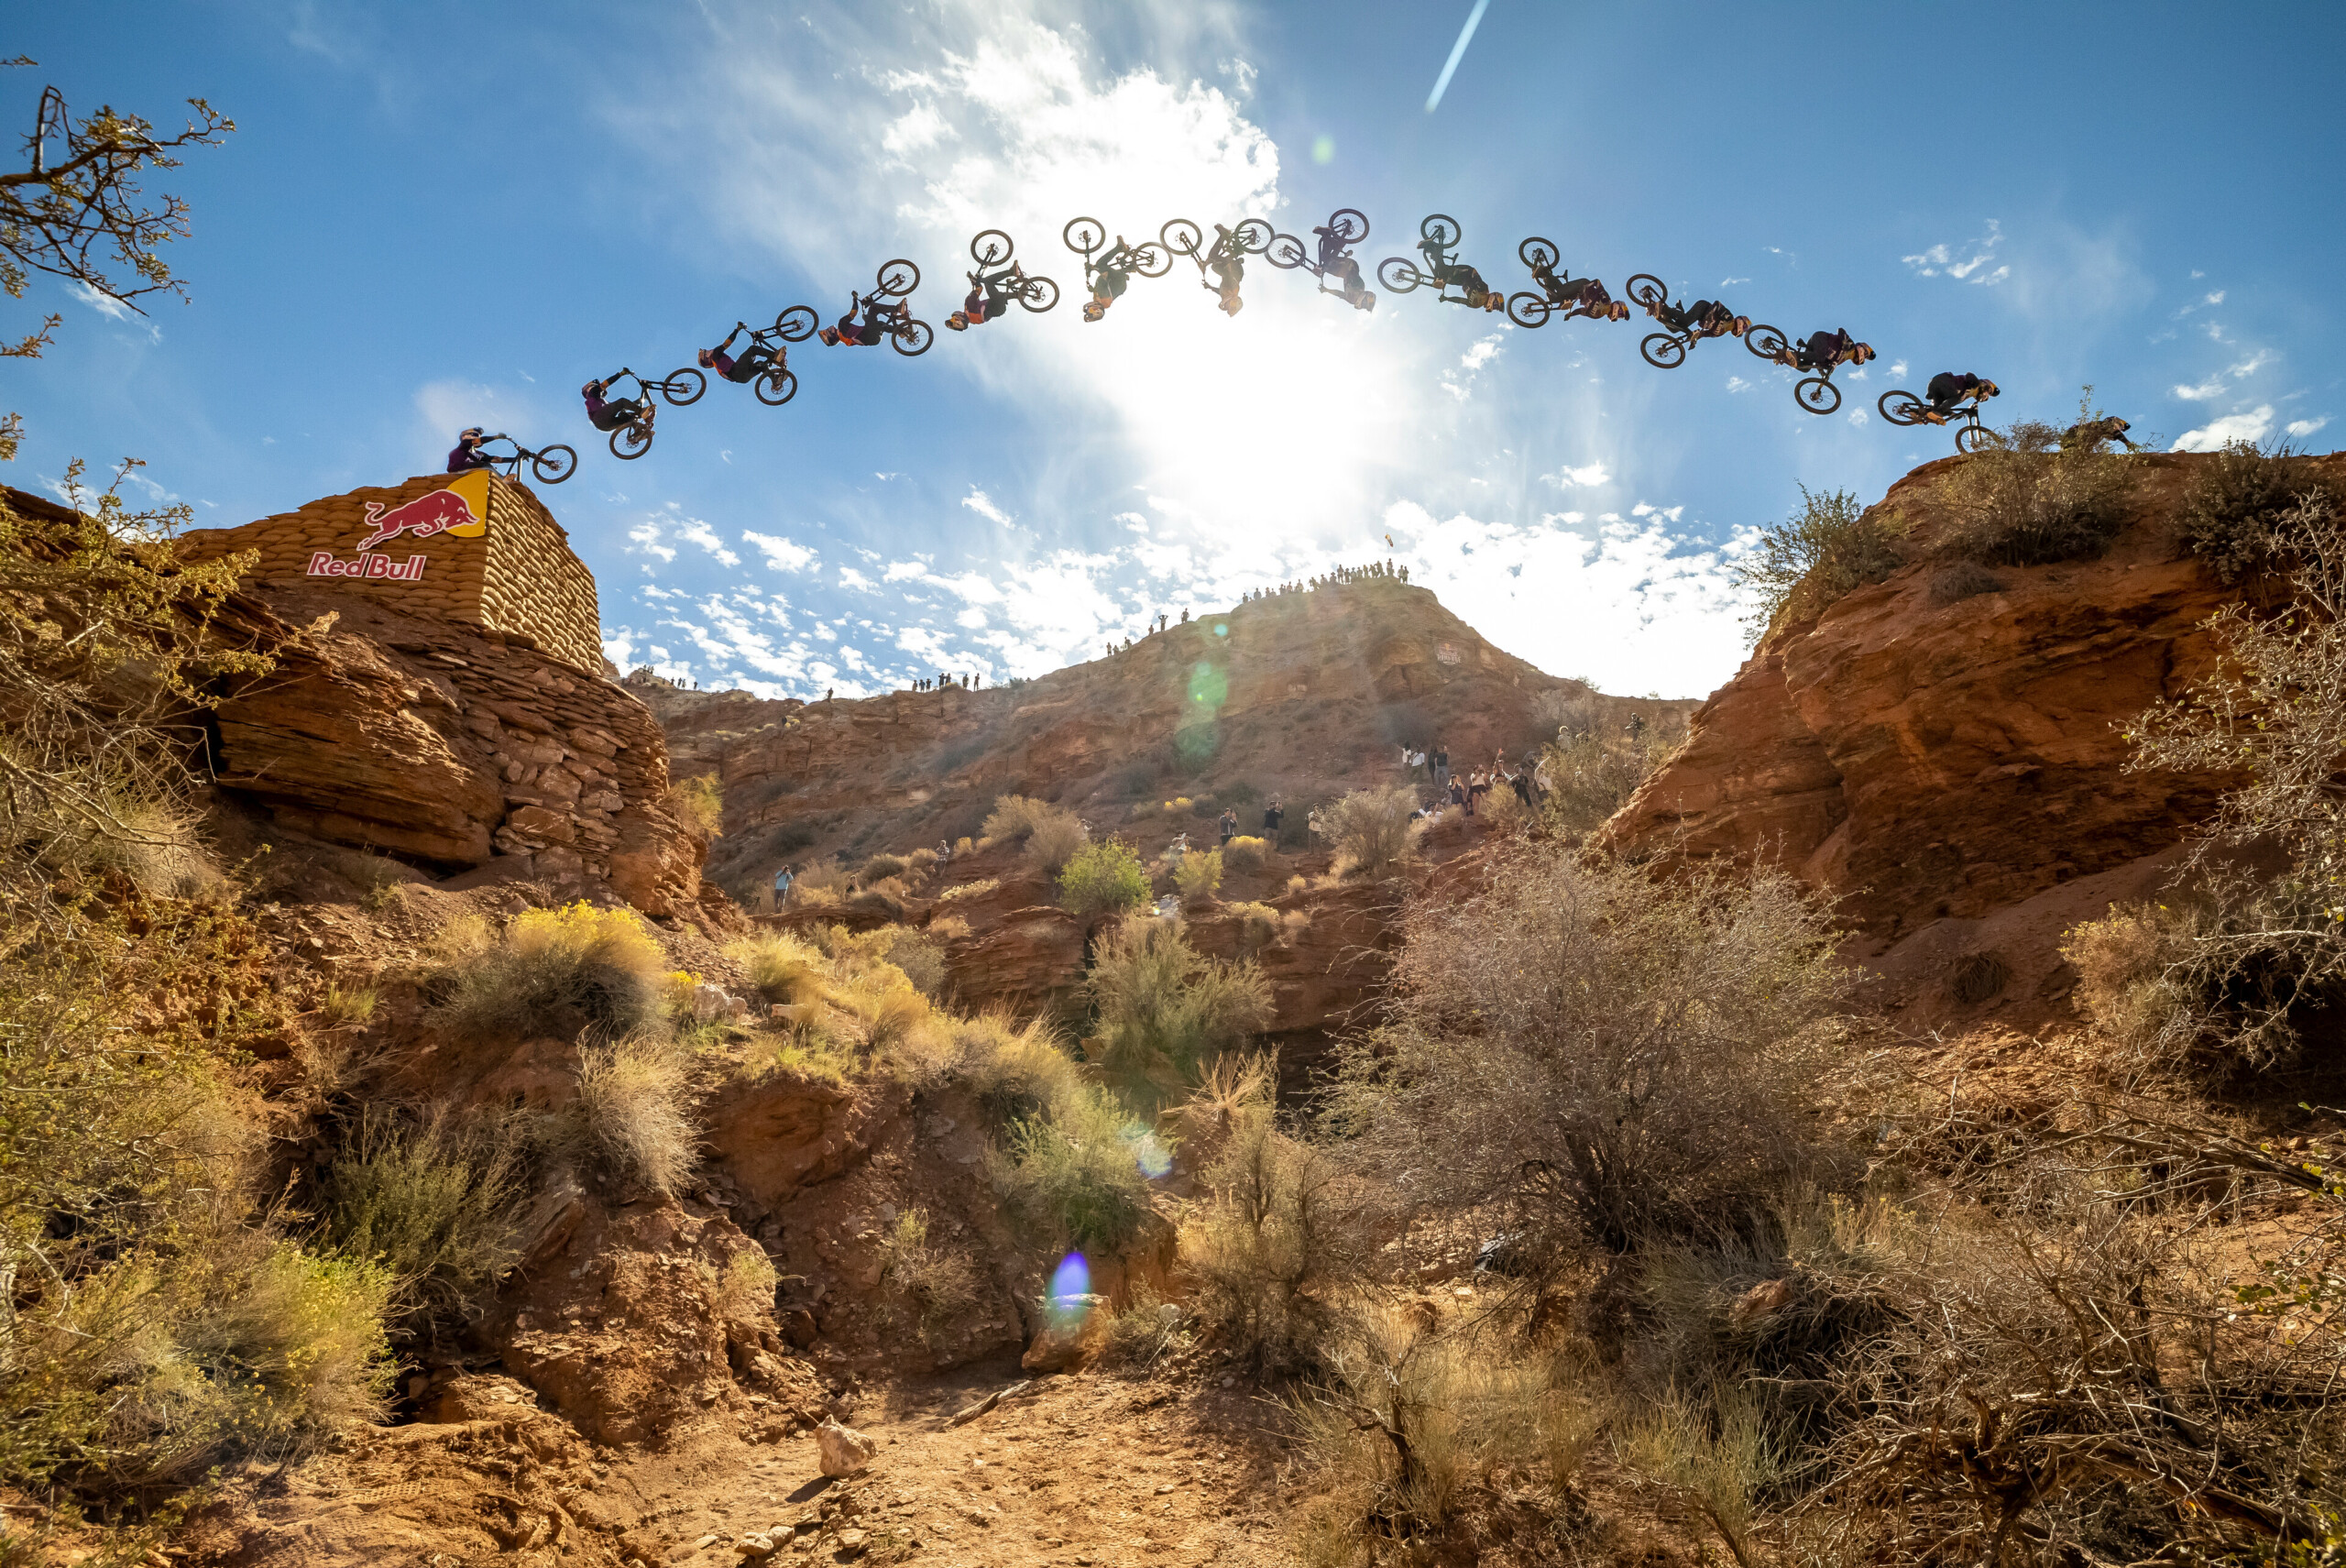 22nd Annual Red Bull Rampage to be Held Friday, October 13